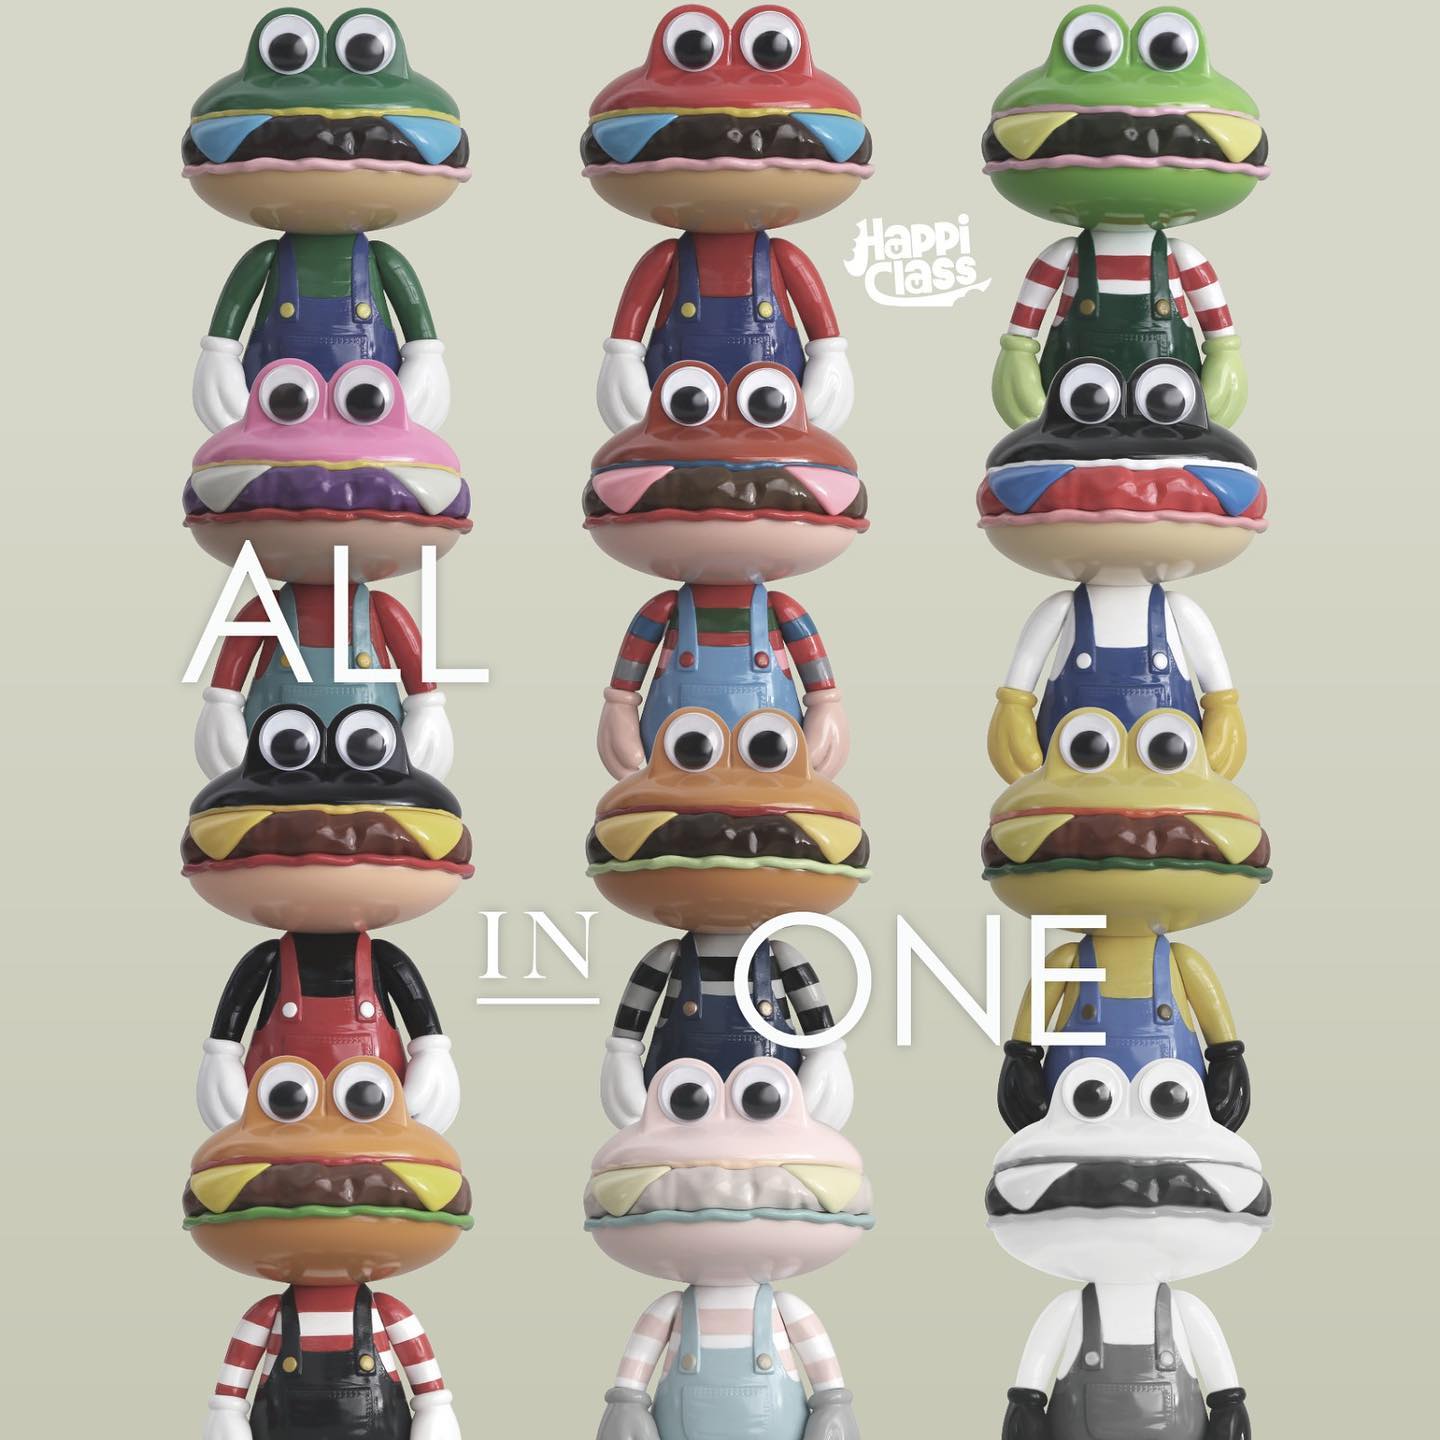 HAPPI CLASS x PLAYMAXX EASTER “ALL IN ONE” EXHIBITION - The Toy